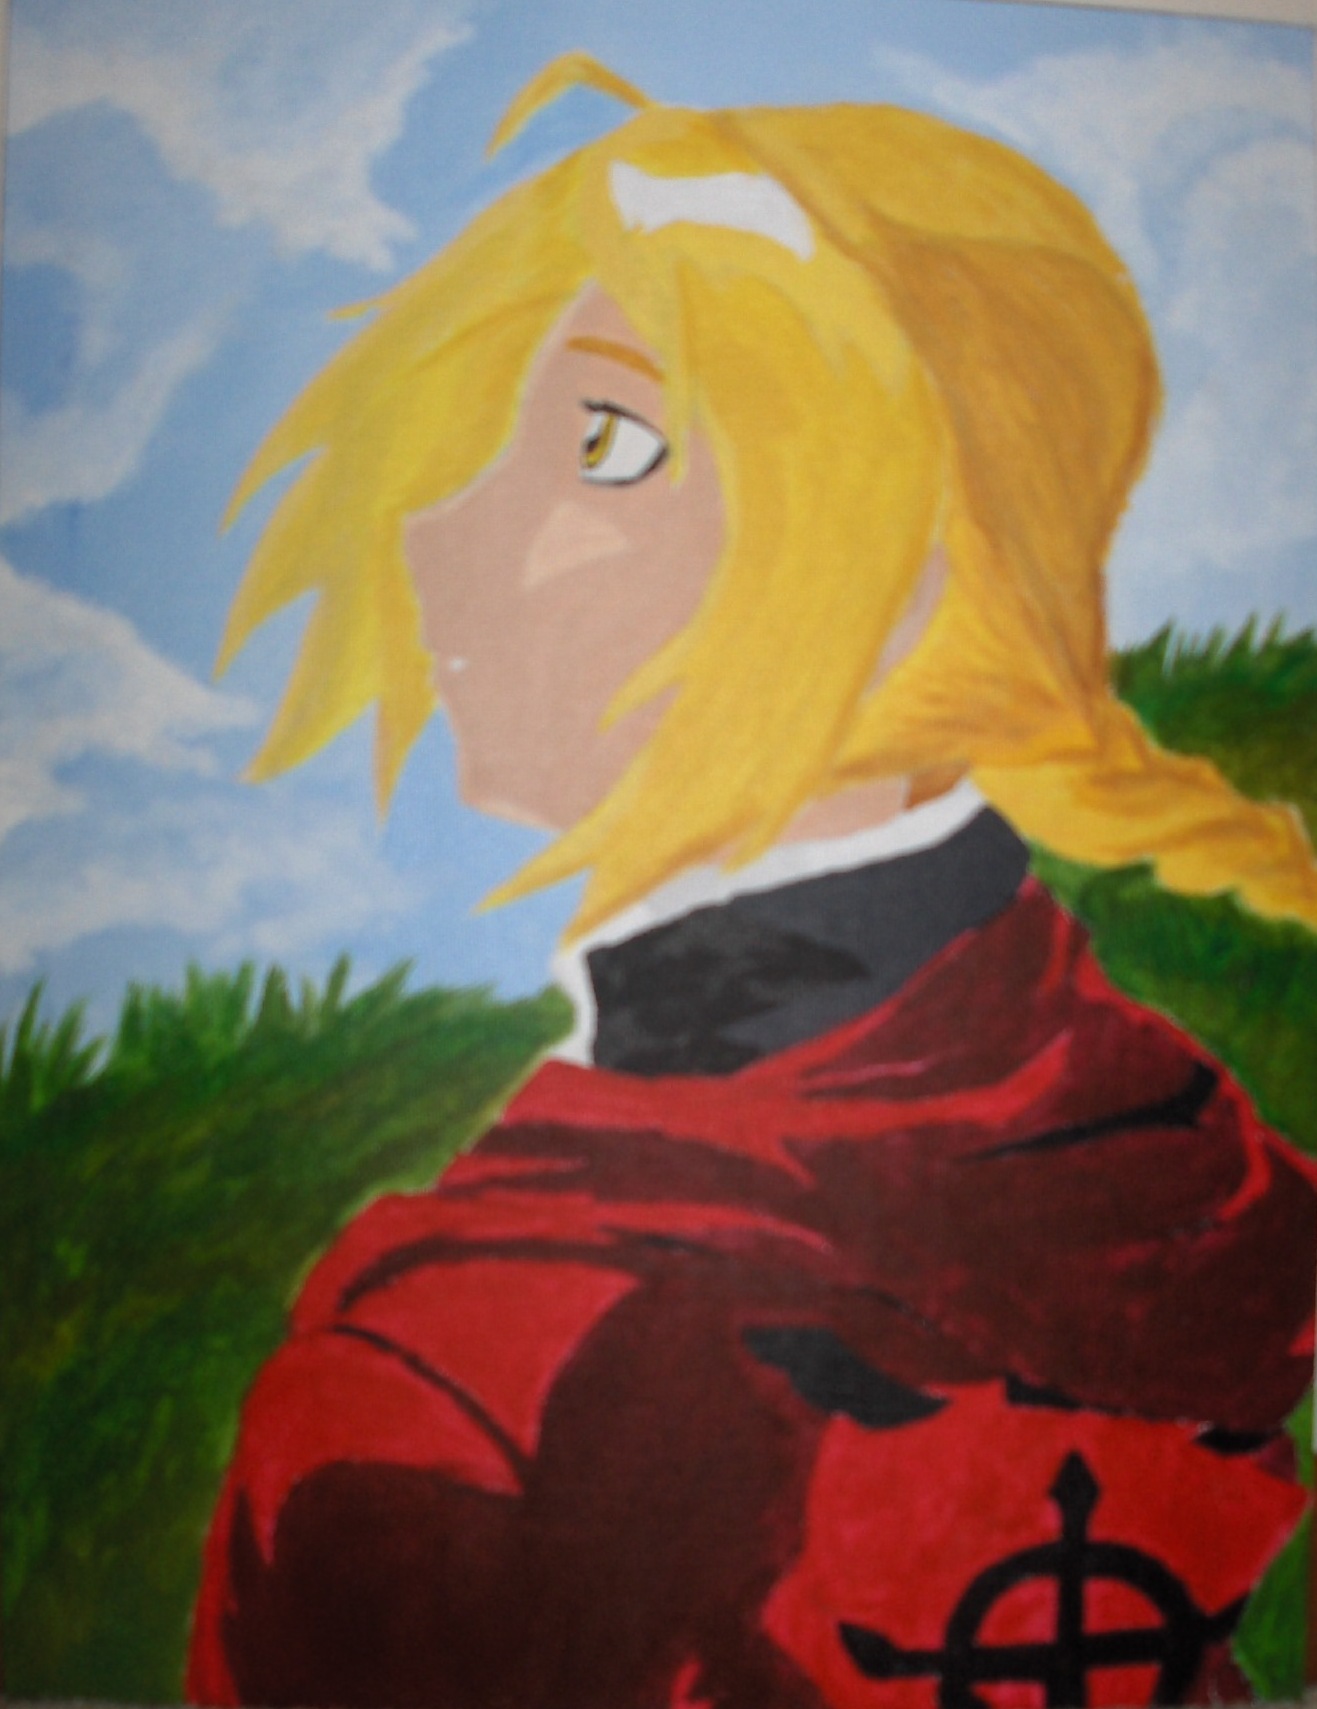 Edward Elric by onlyaloneuntillucame